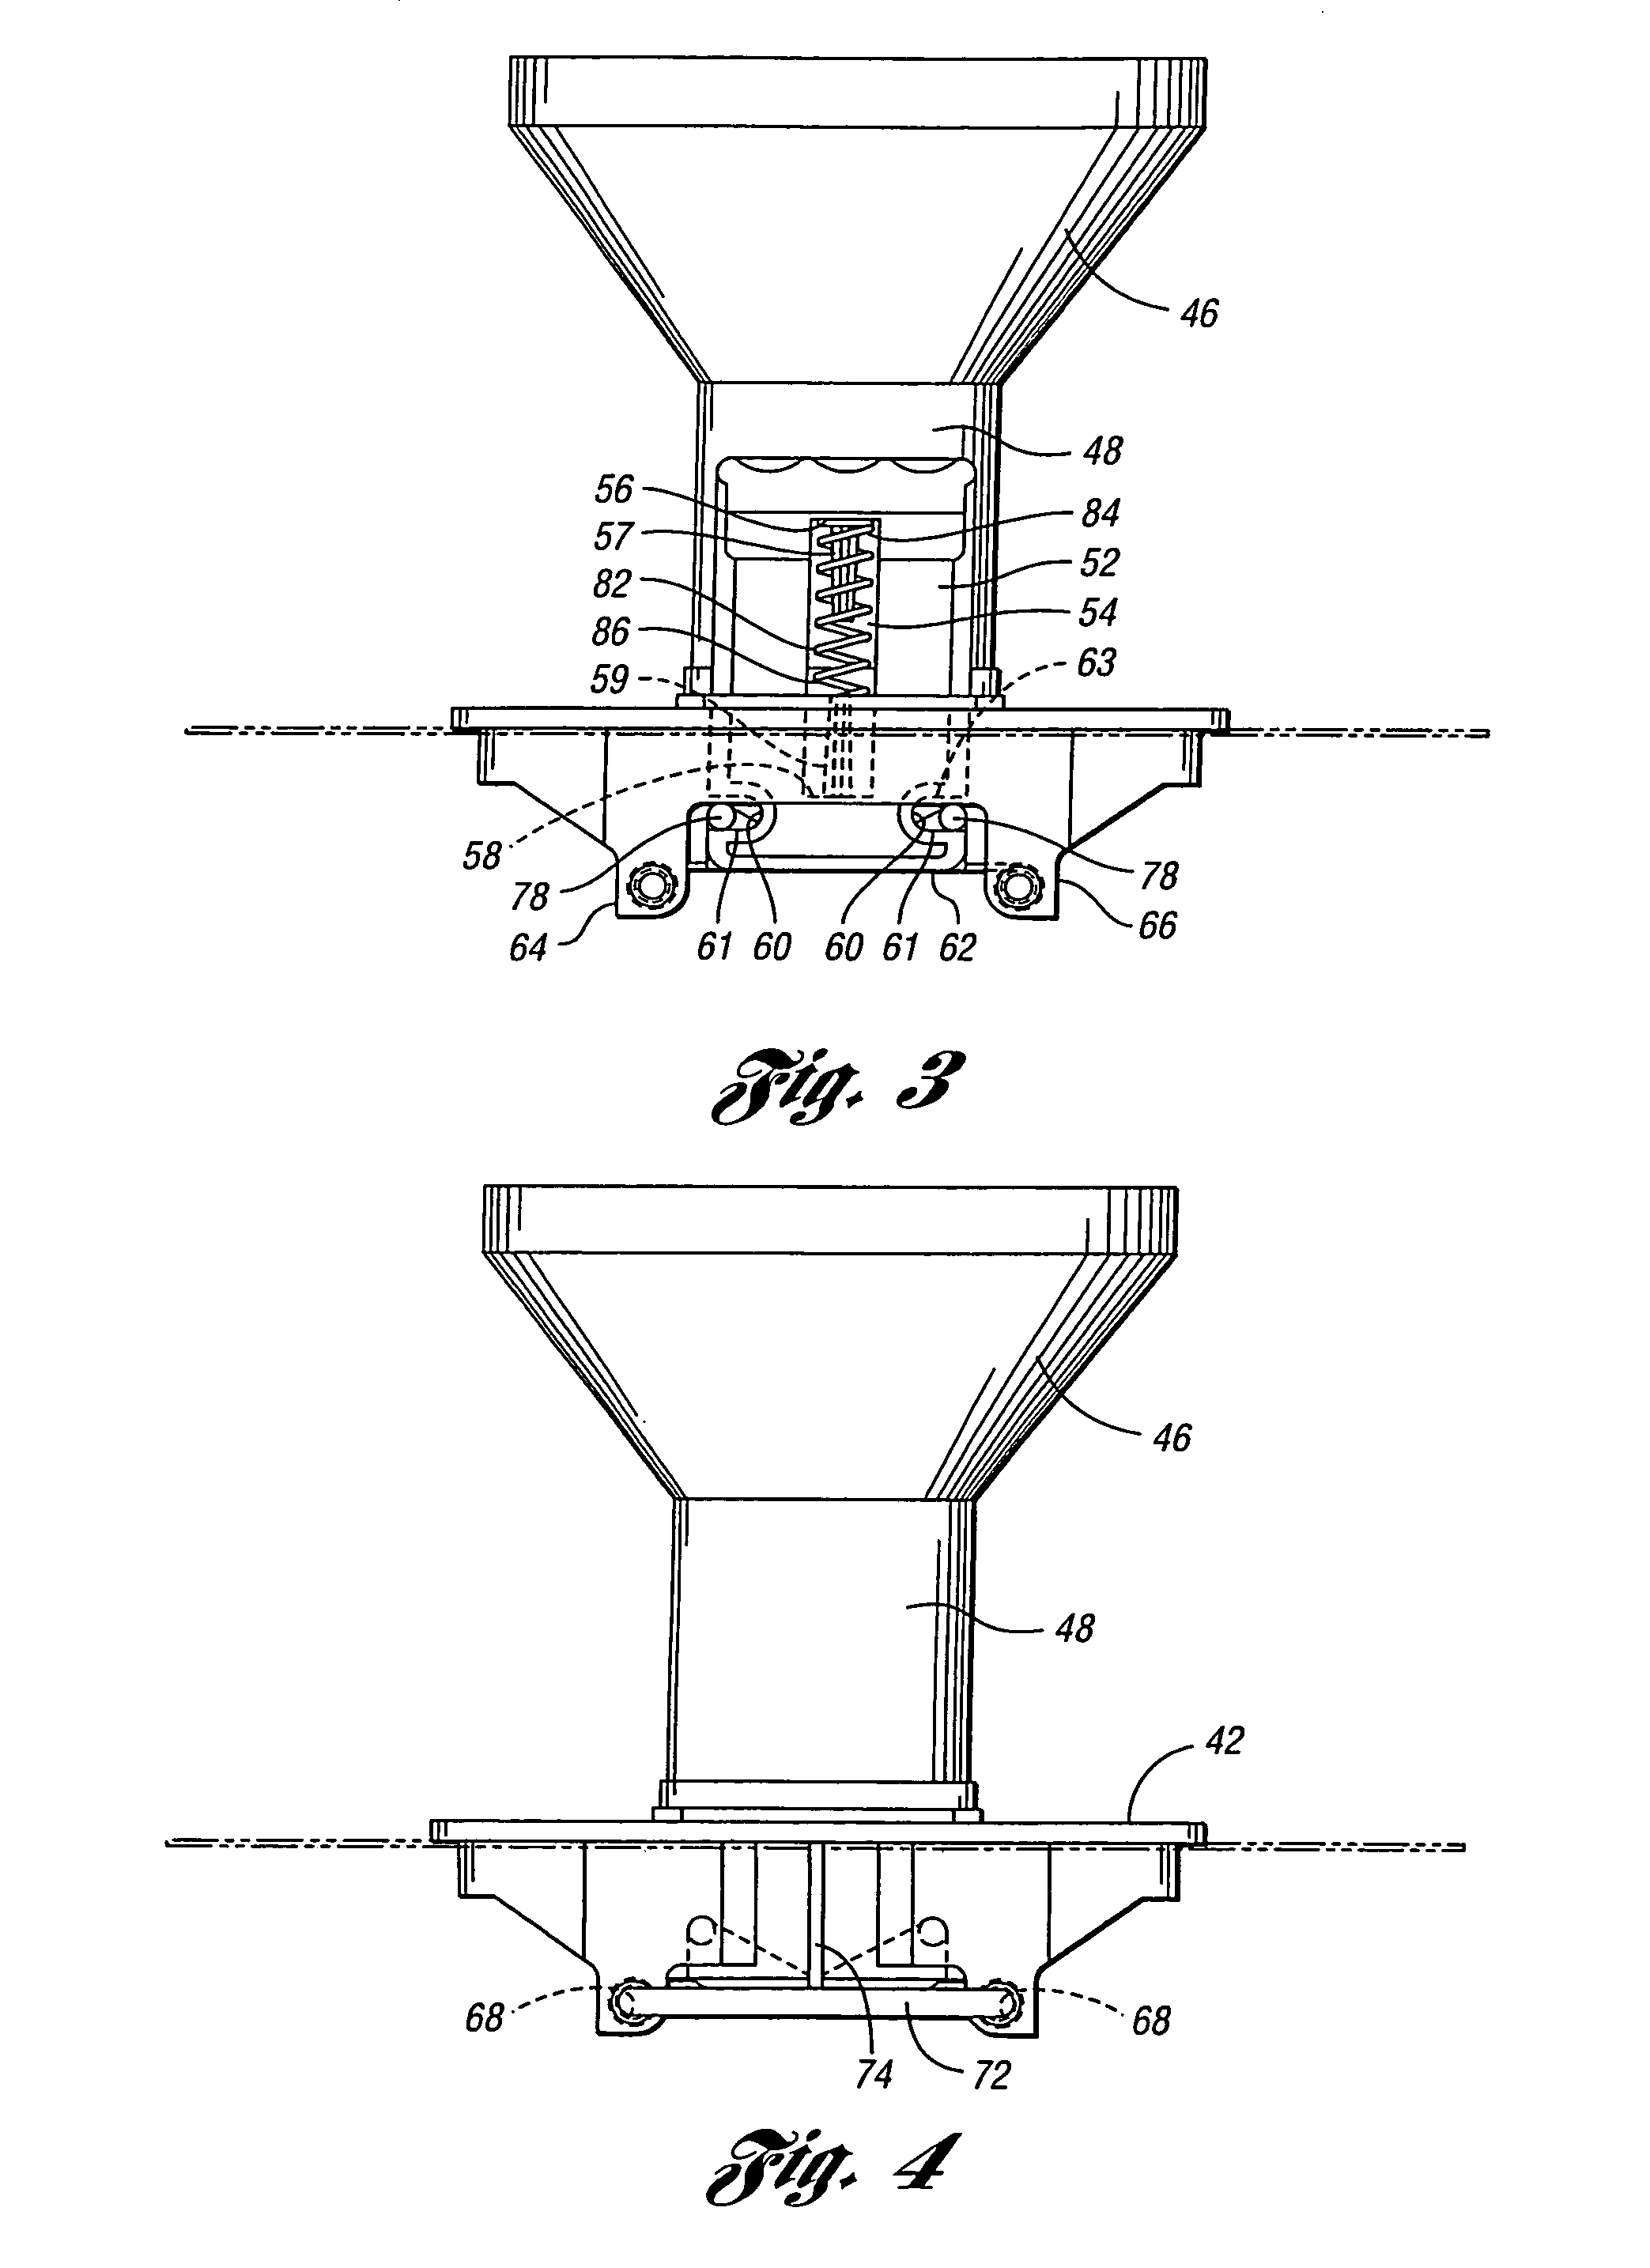 Dischargeable storage device for distributing food over a surface